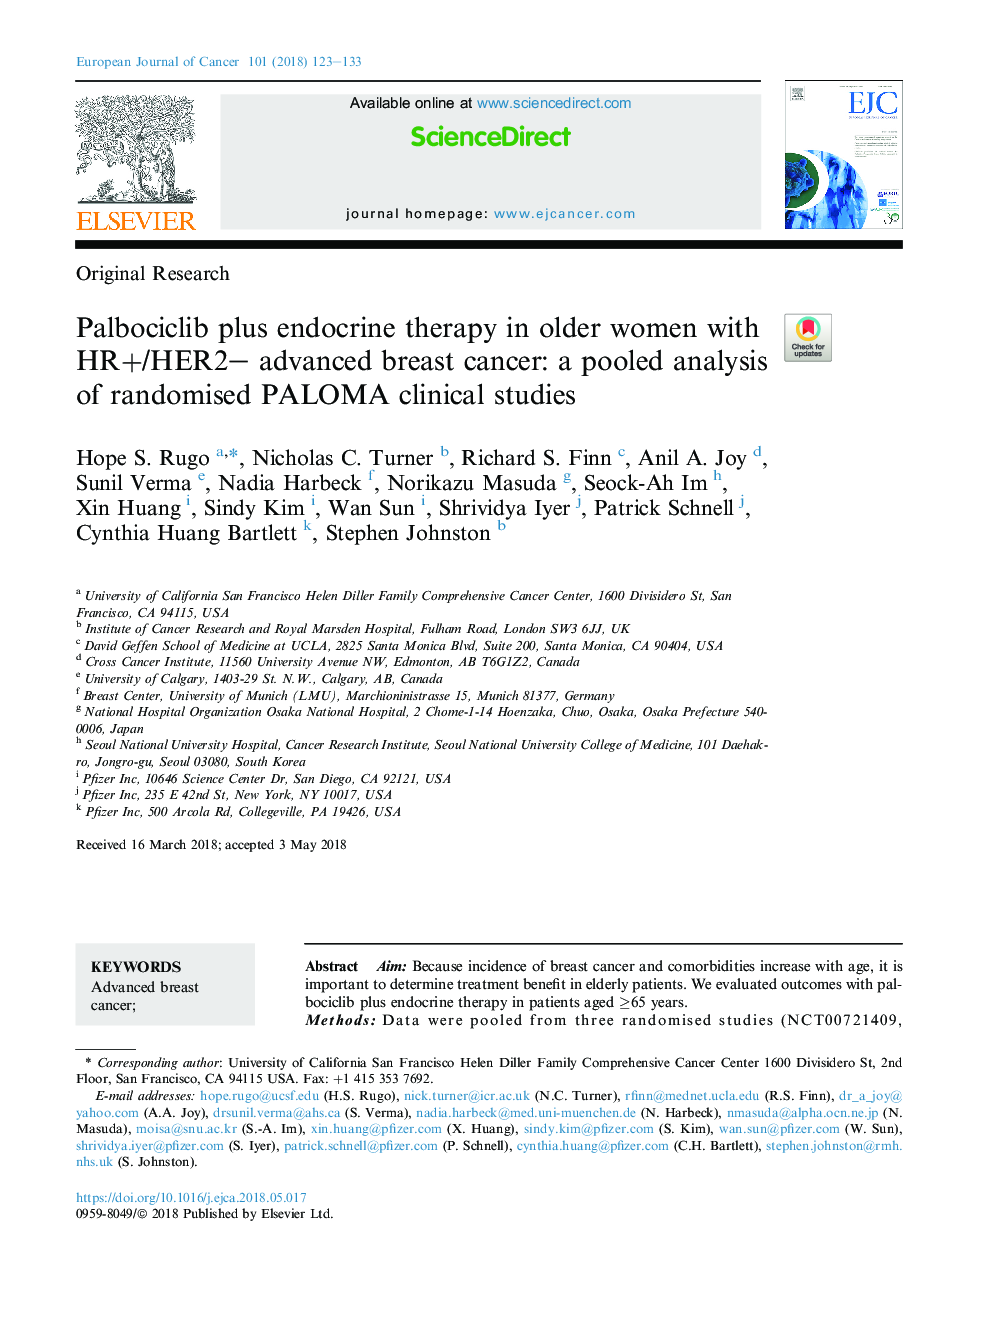 Palbociclib plus endocrine therapy in older women with HR+/HER2- advanced breast cancer: a pooled analysis of randomised PALOMA clinical studies